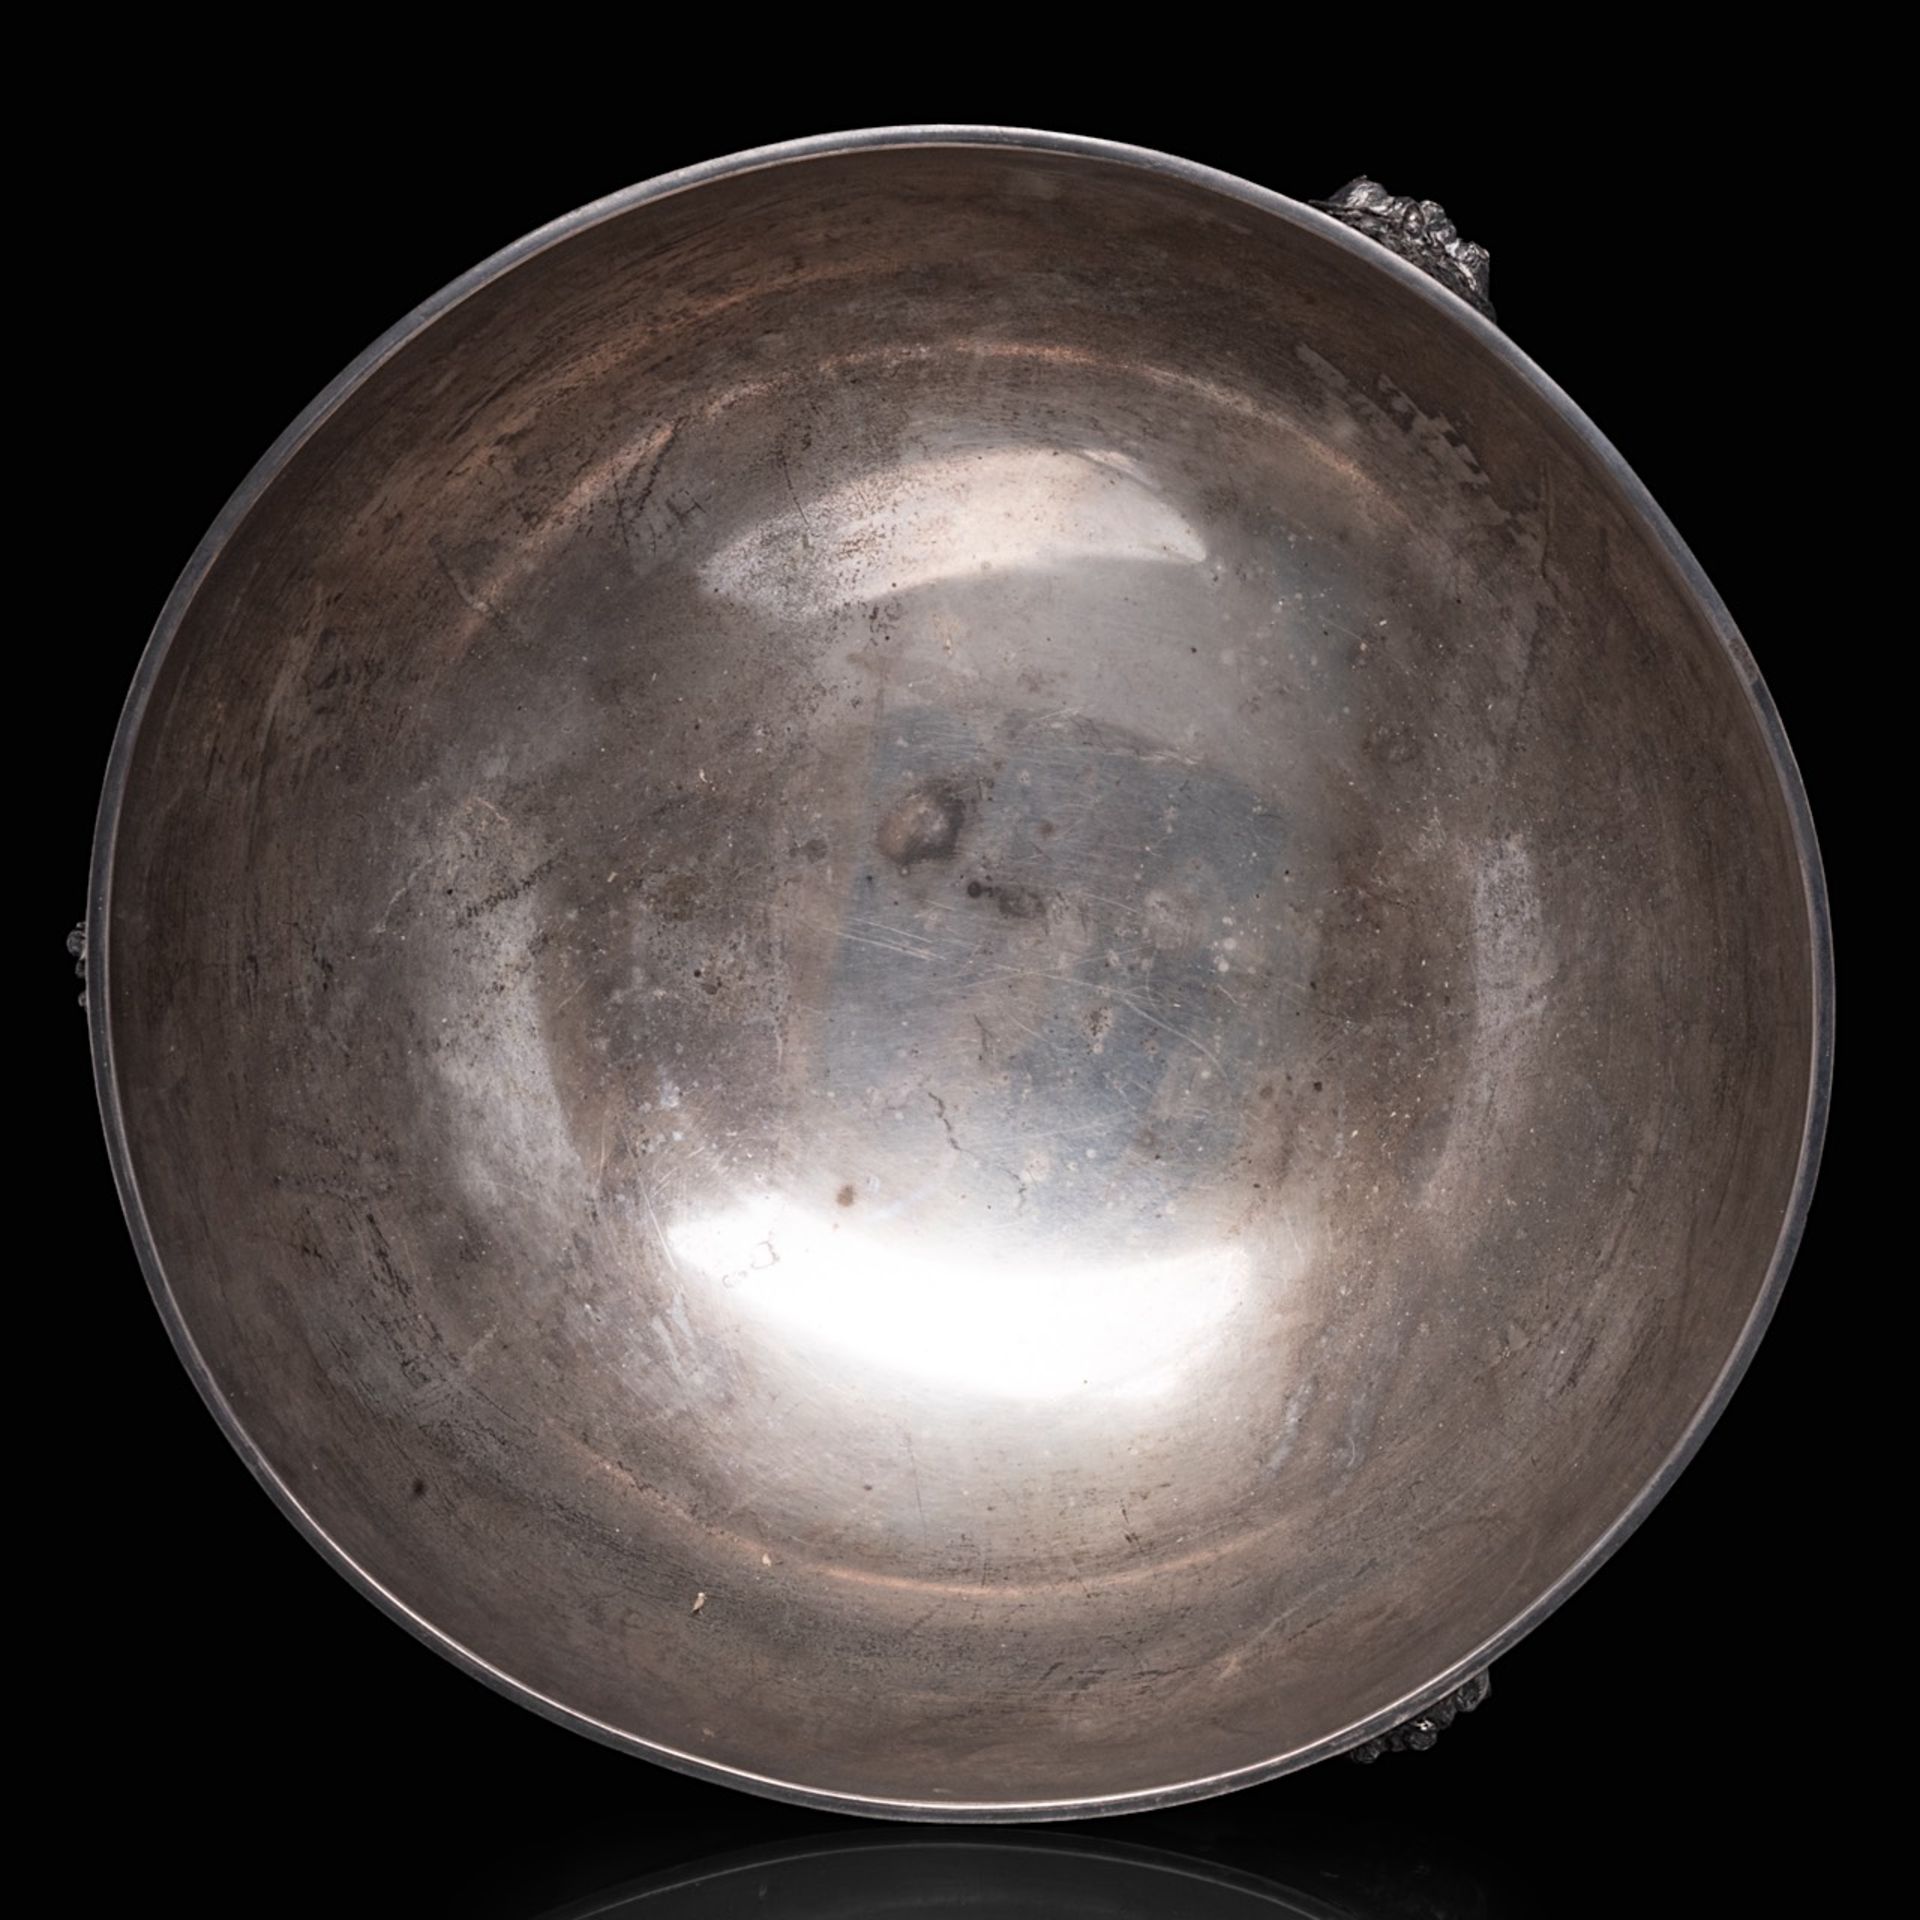 A Neoclassical English silver punchbowl, London hallmarks, year letter E (1900-1901), maker's mark J - Image 5 of 8